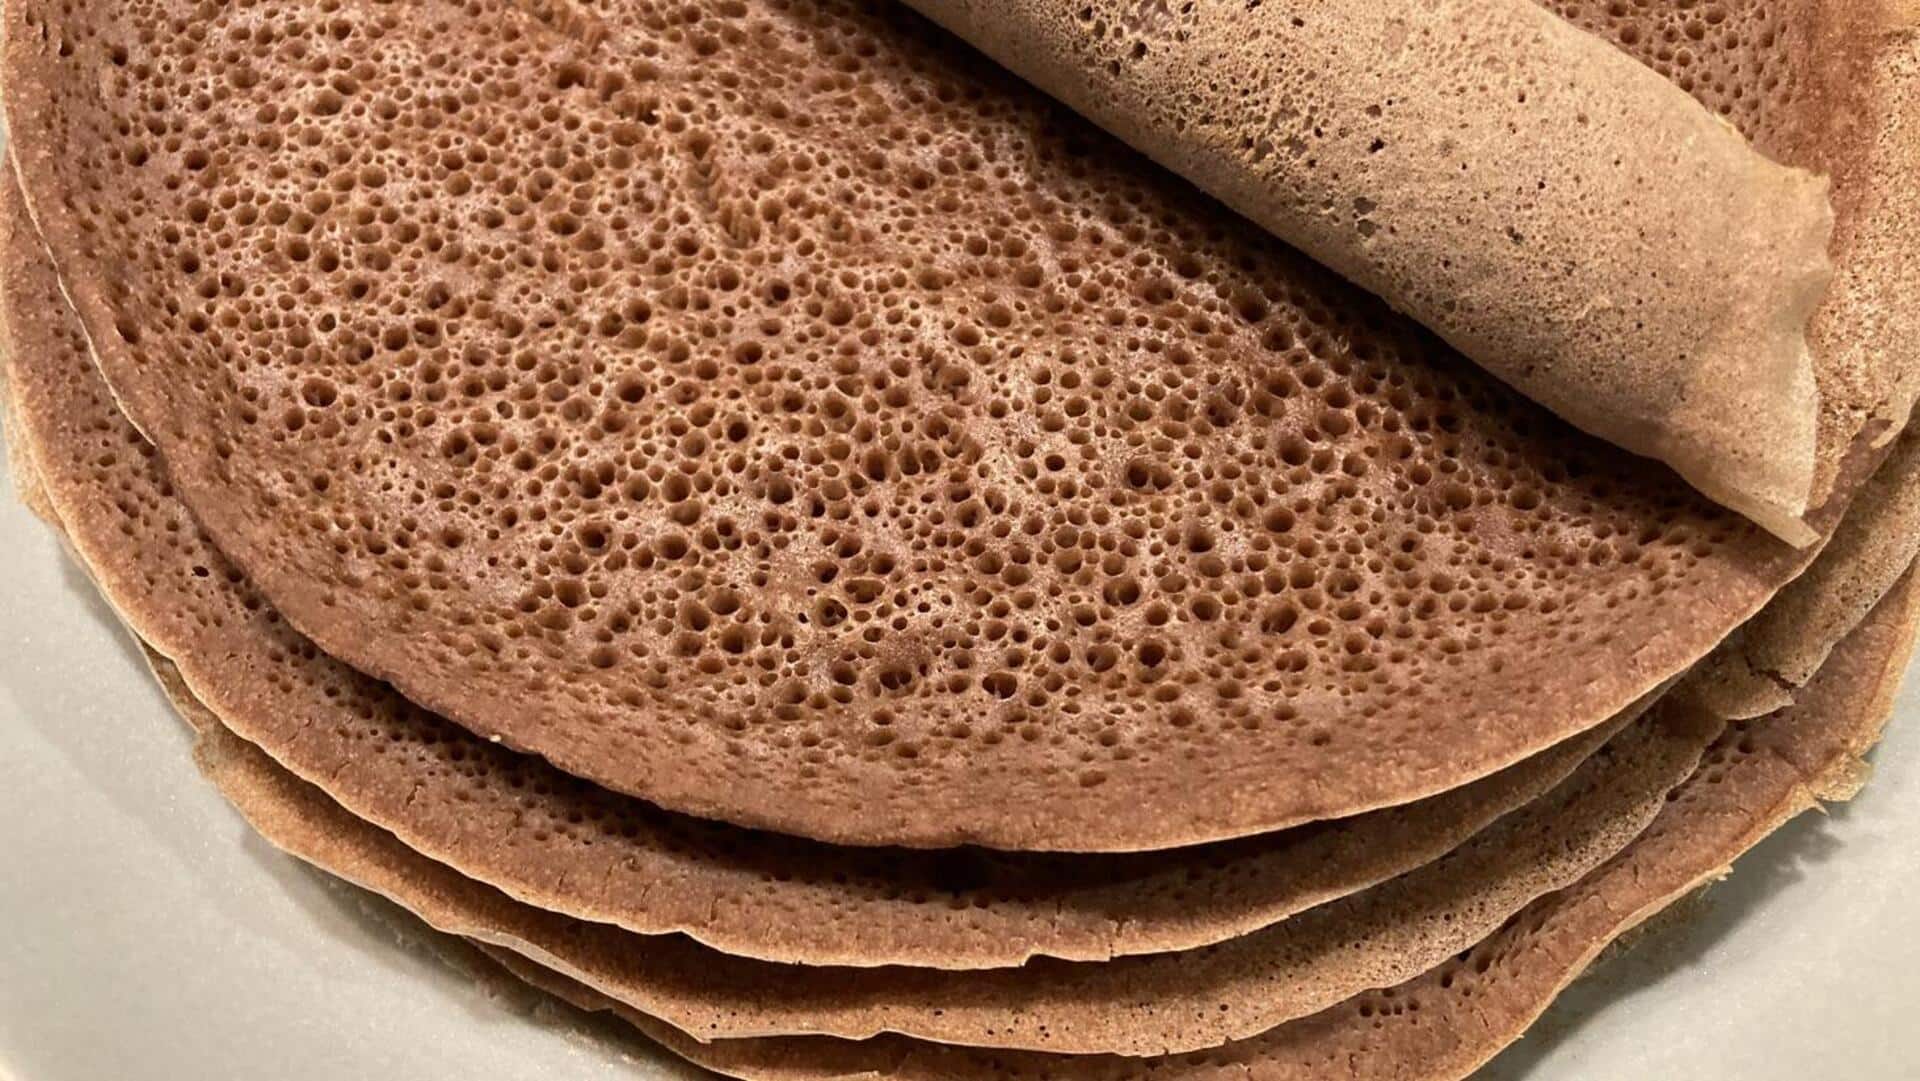 Check out this Ethiopian injera with spiced lentils recipe